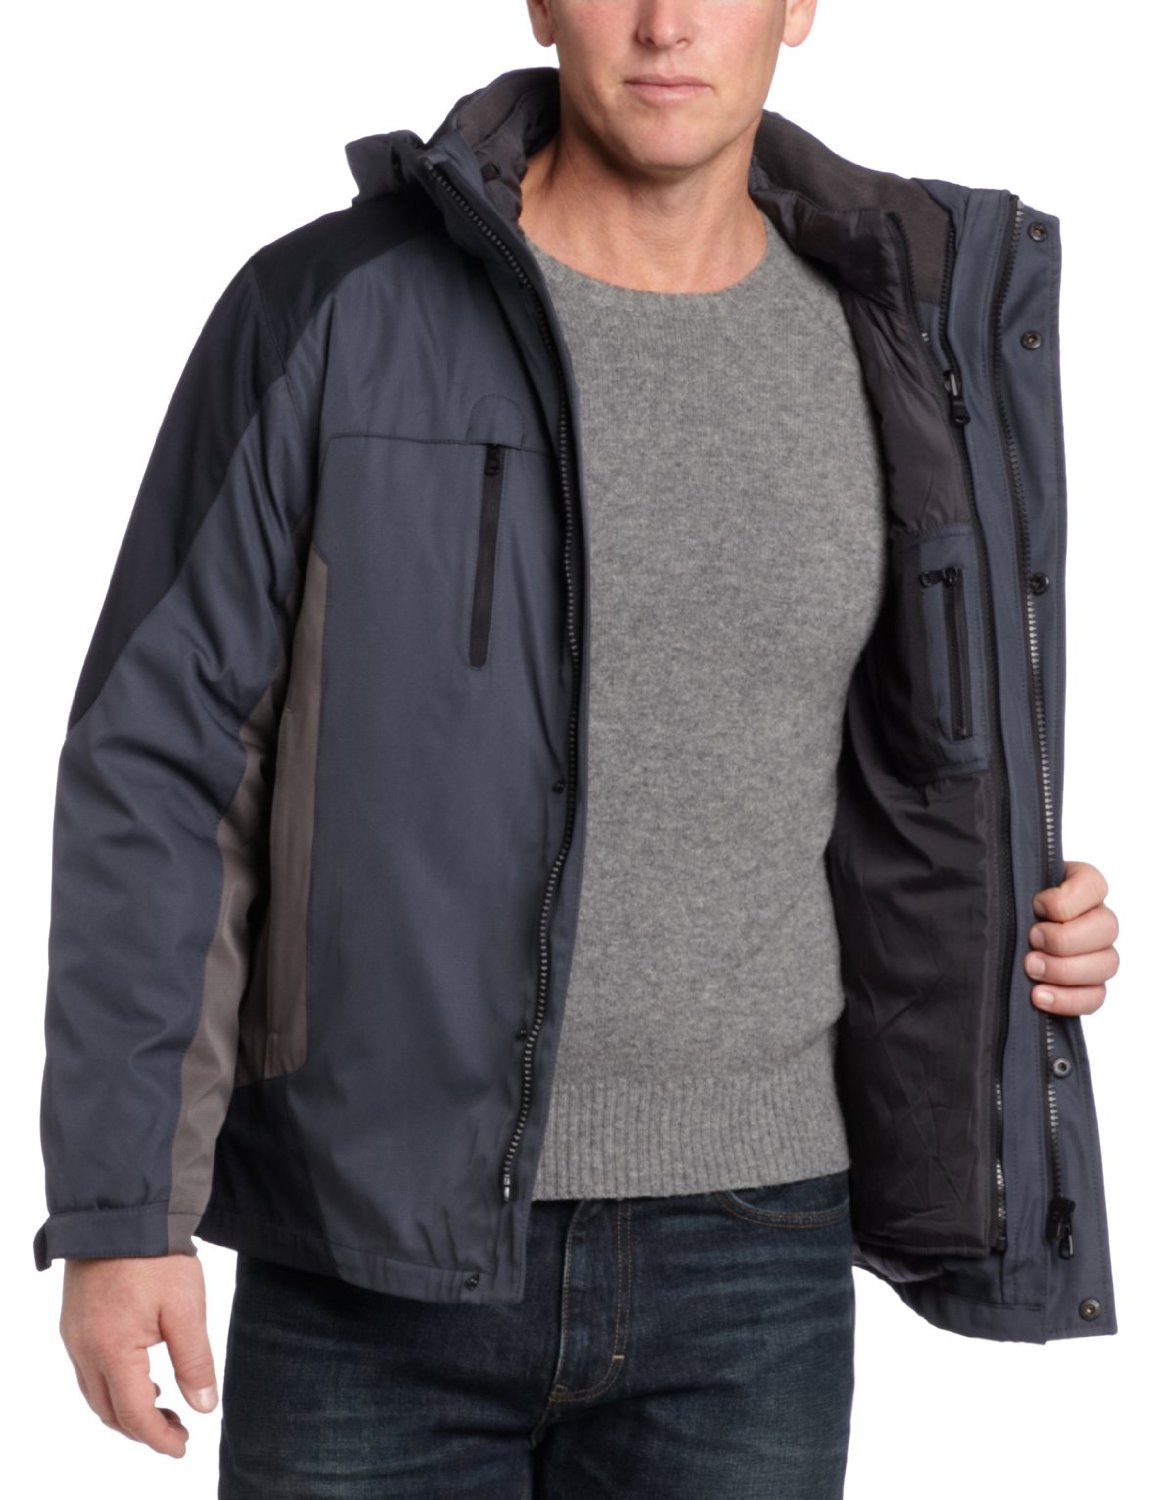 Calvin Klein Men's Rip Stop 3 In 1 Systems Jacket, $61.35 & FREE Shipping